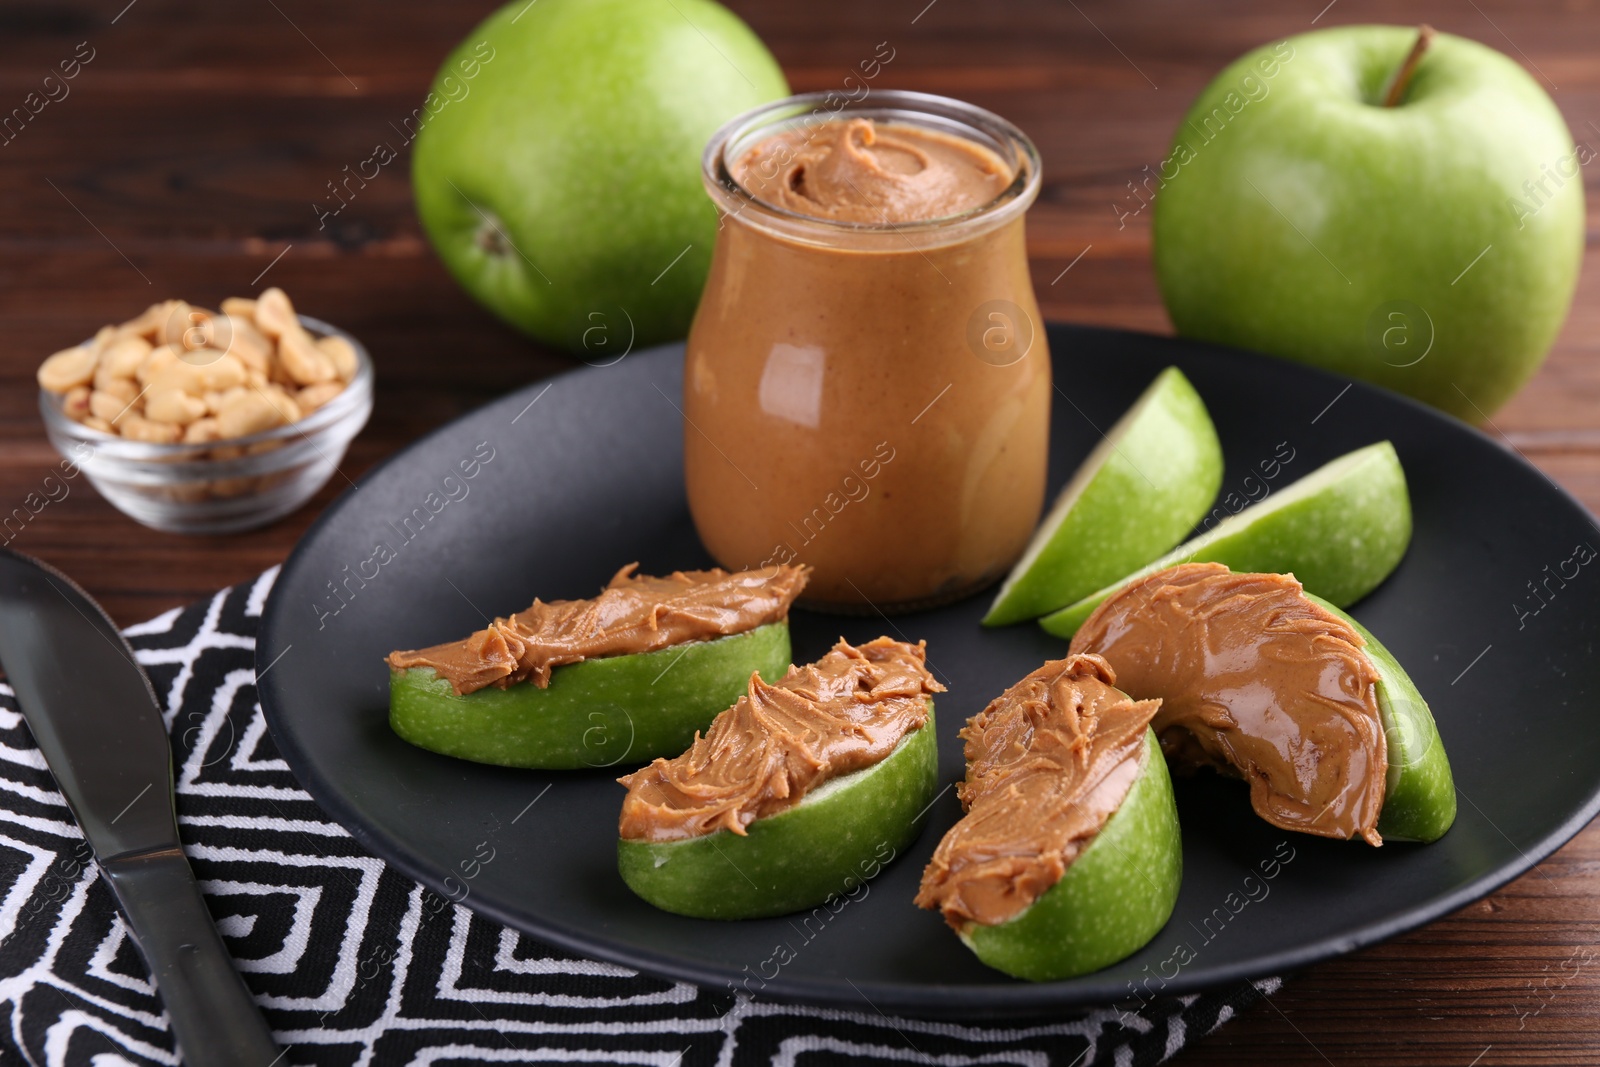 Photo of Slices of fresh green apple with peanut butter on wooden table